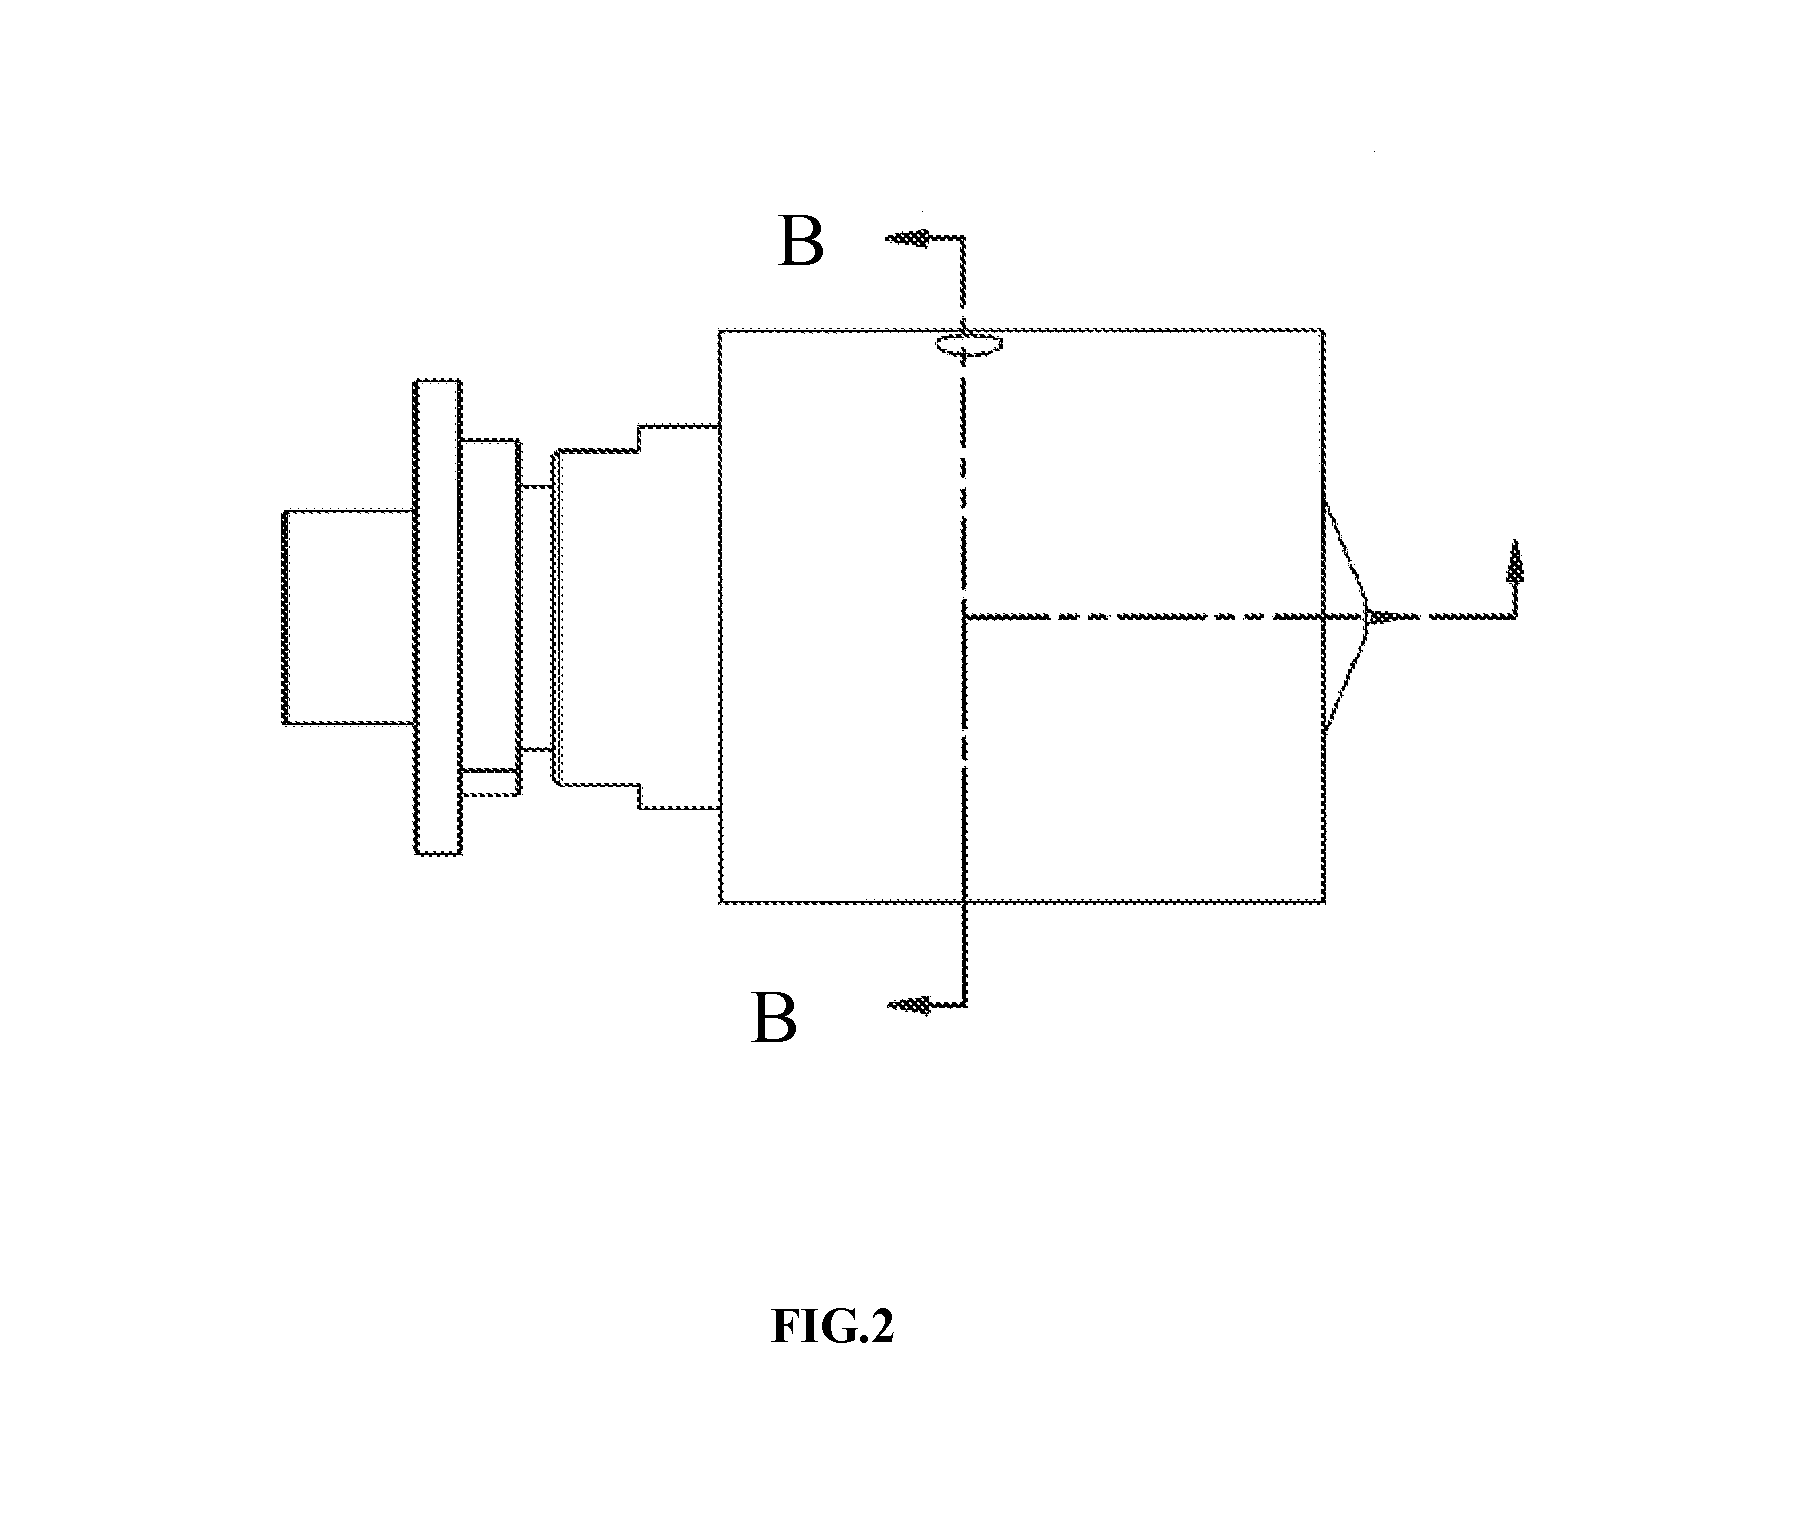 Coform fibrous materials and method for making same